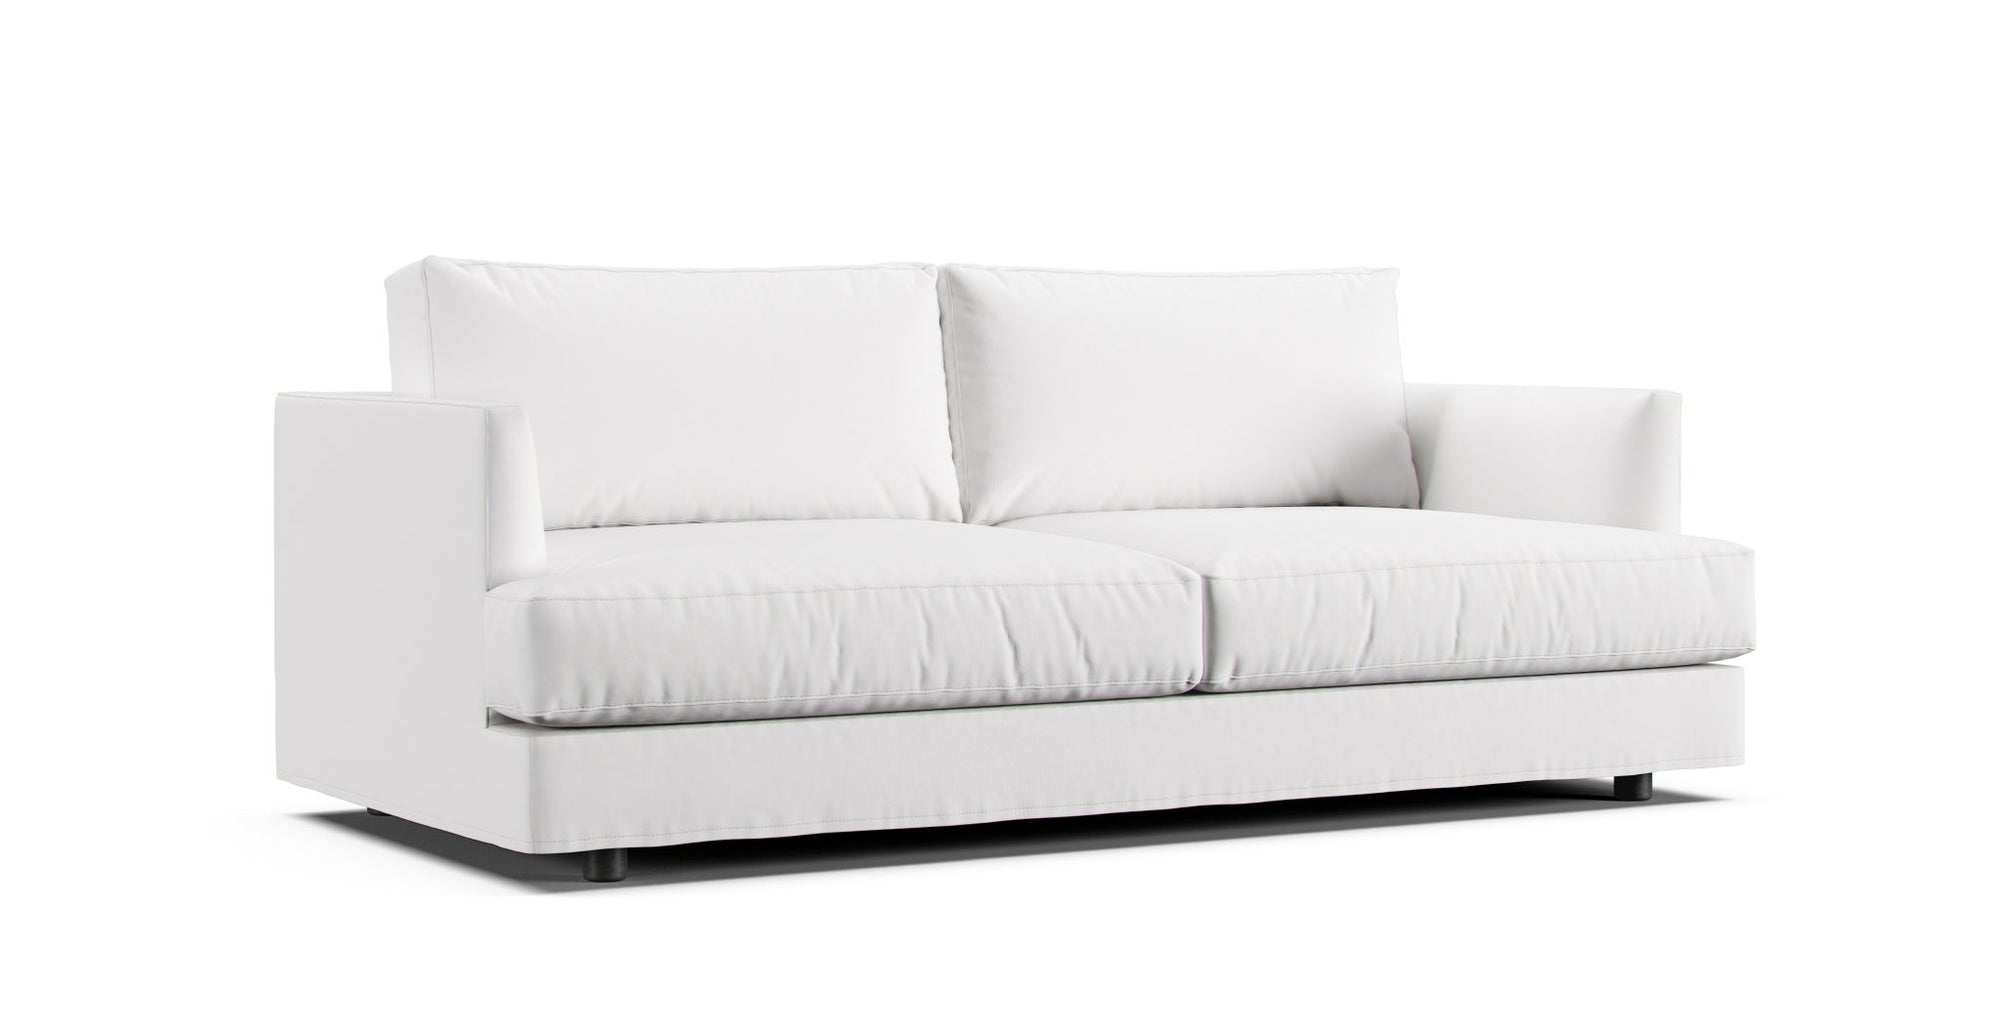 West Elm Haven eighty-four inches sofa featuring machine washable white Cotton Canvas slipcover